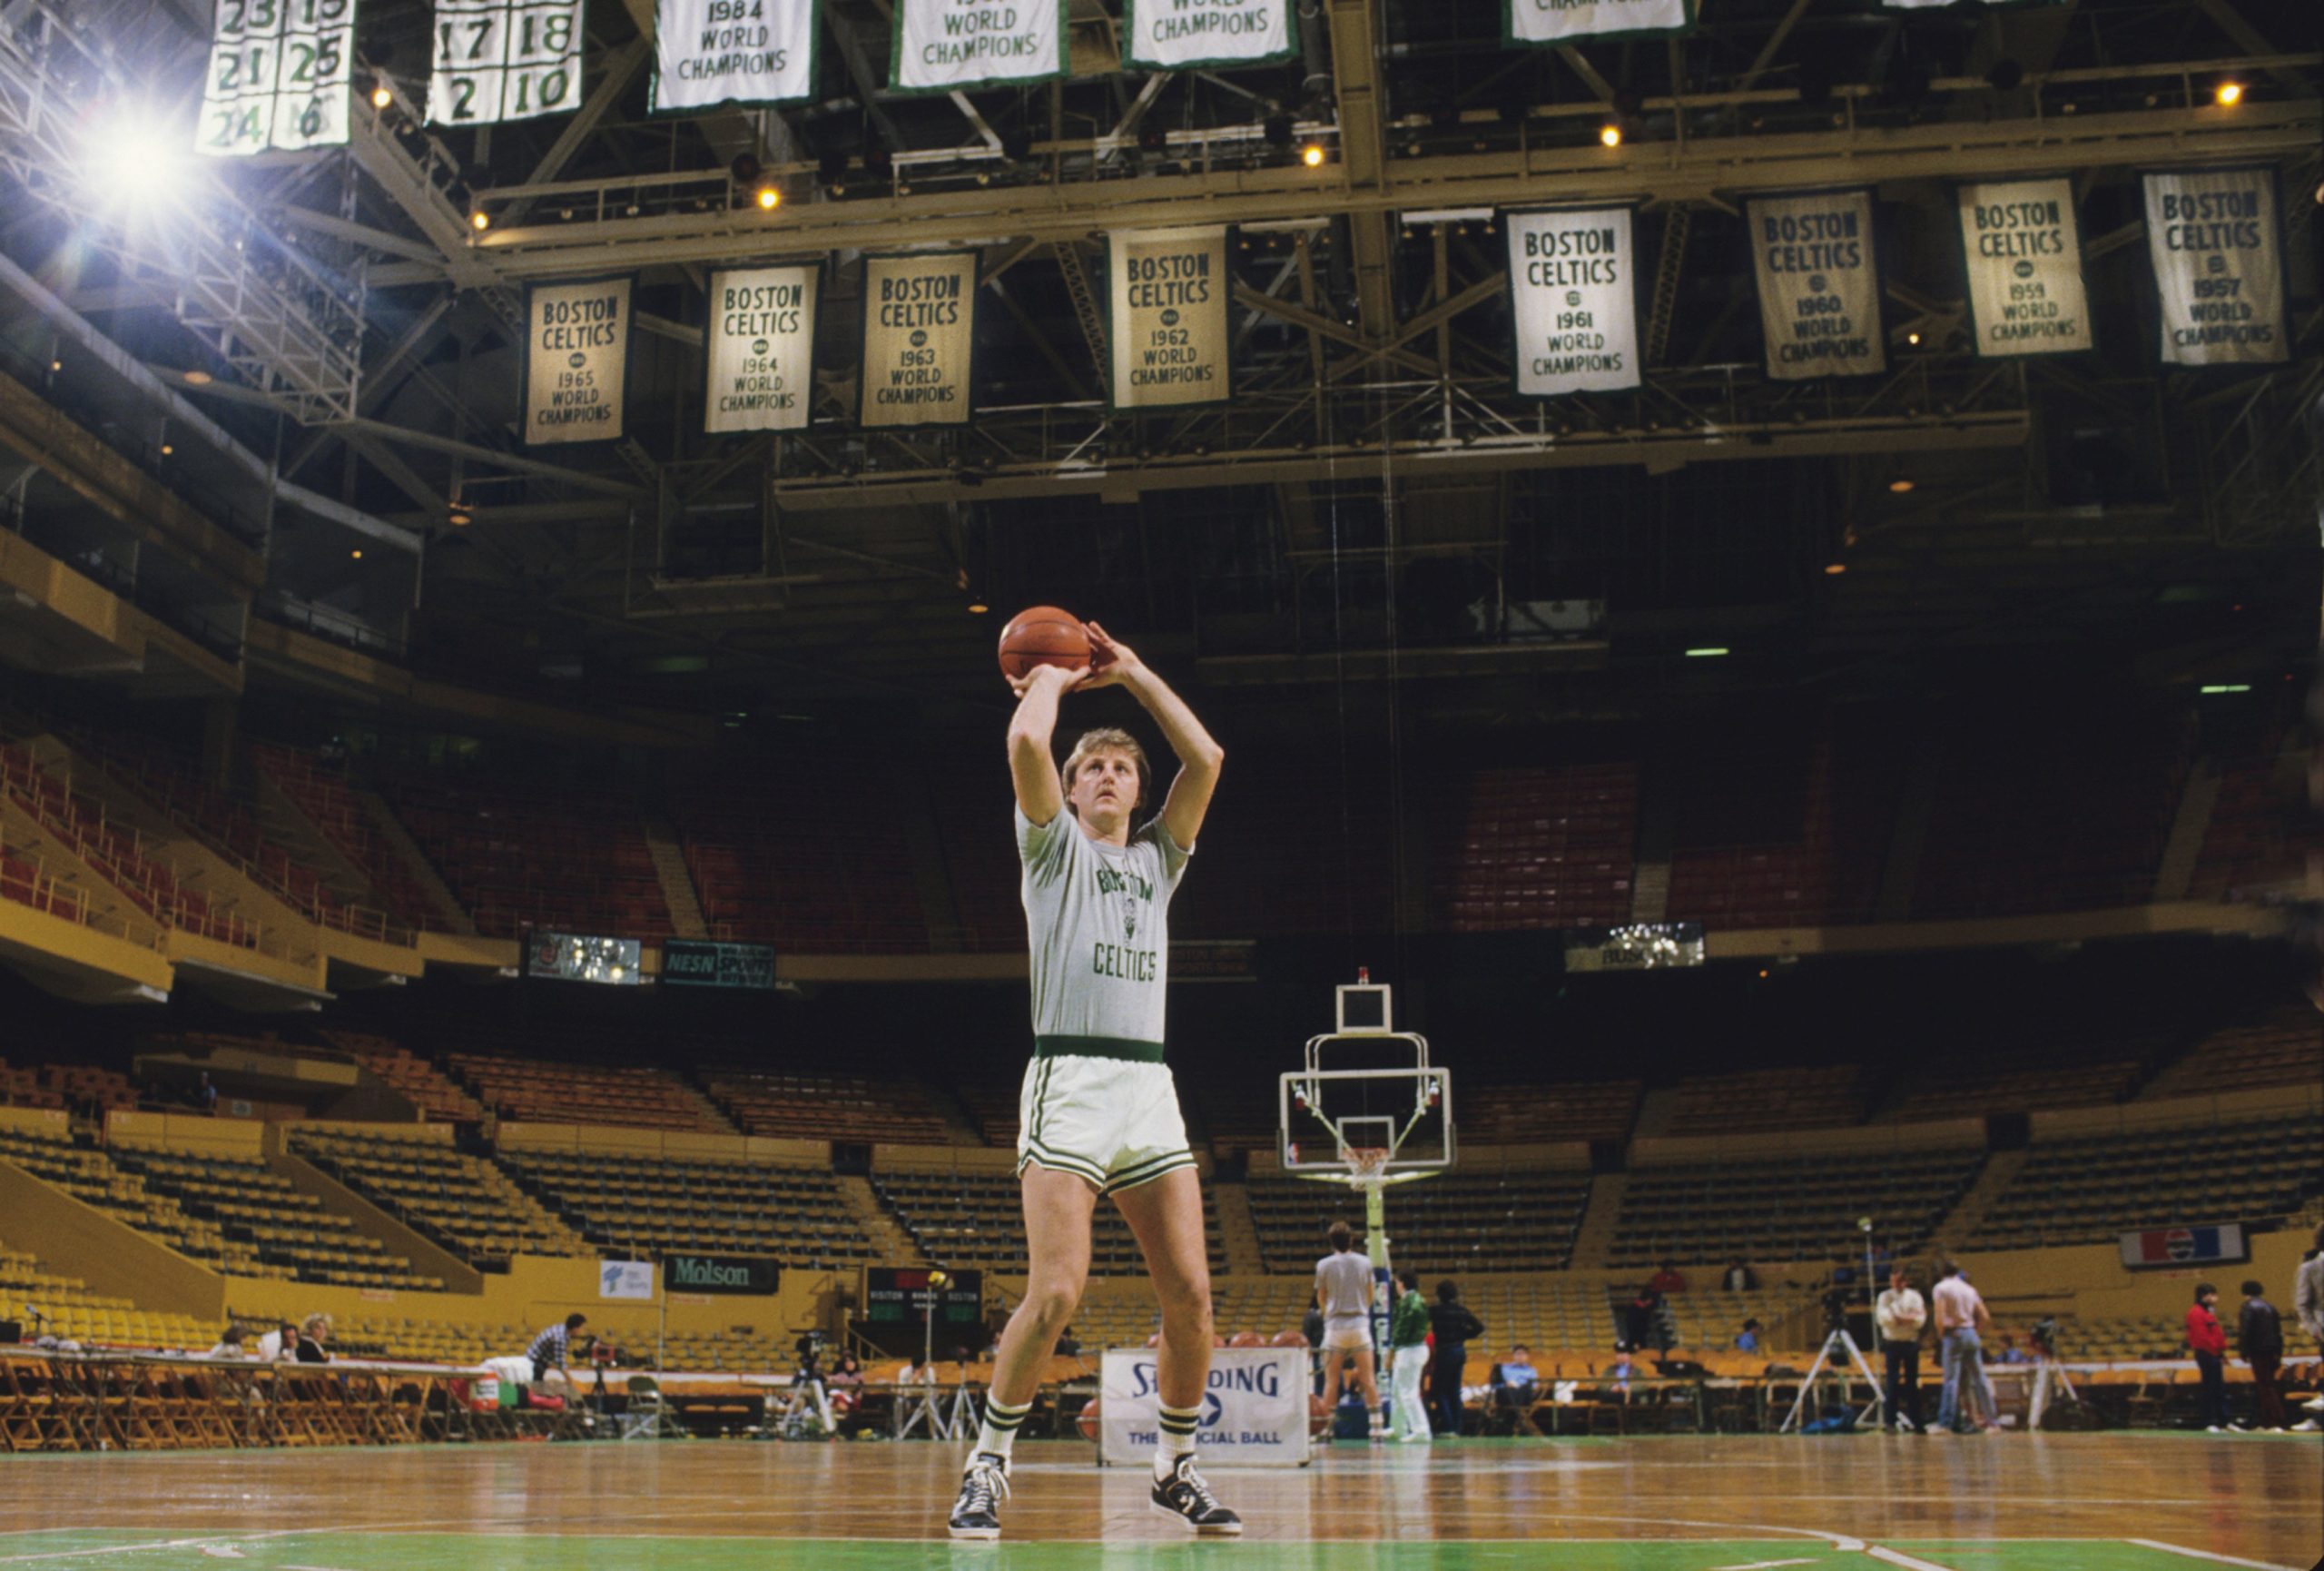 Larry Bird practices his foul shooting in 1986.